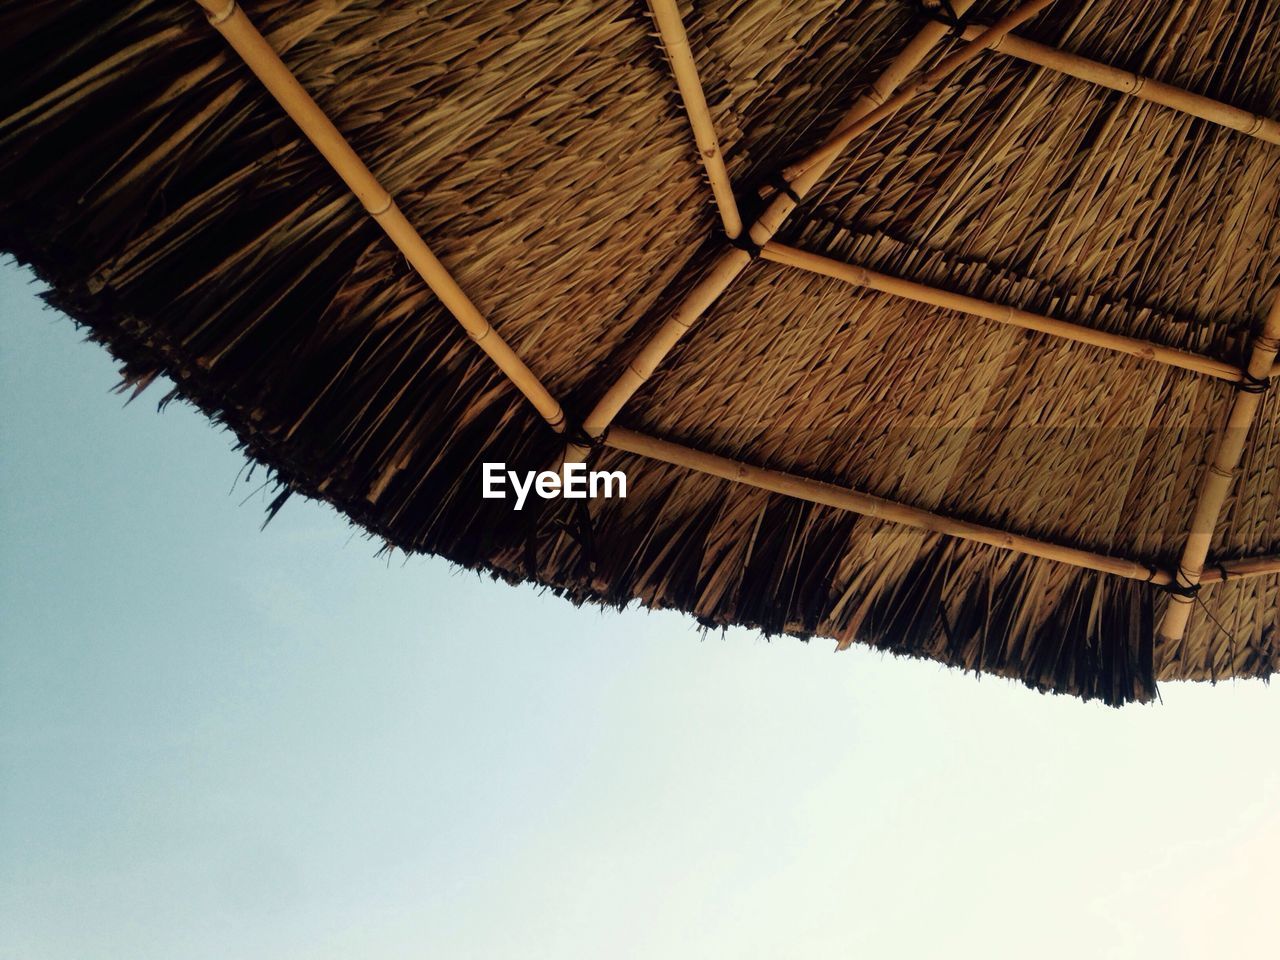 Low angle view of thatched roof against sky during sunny day